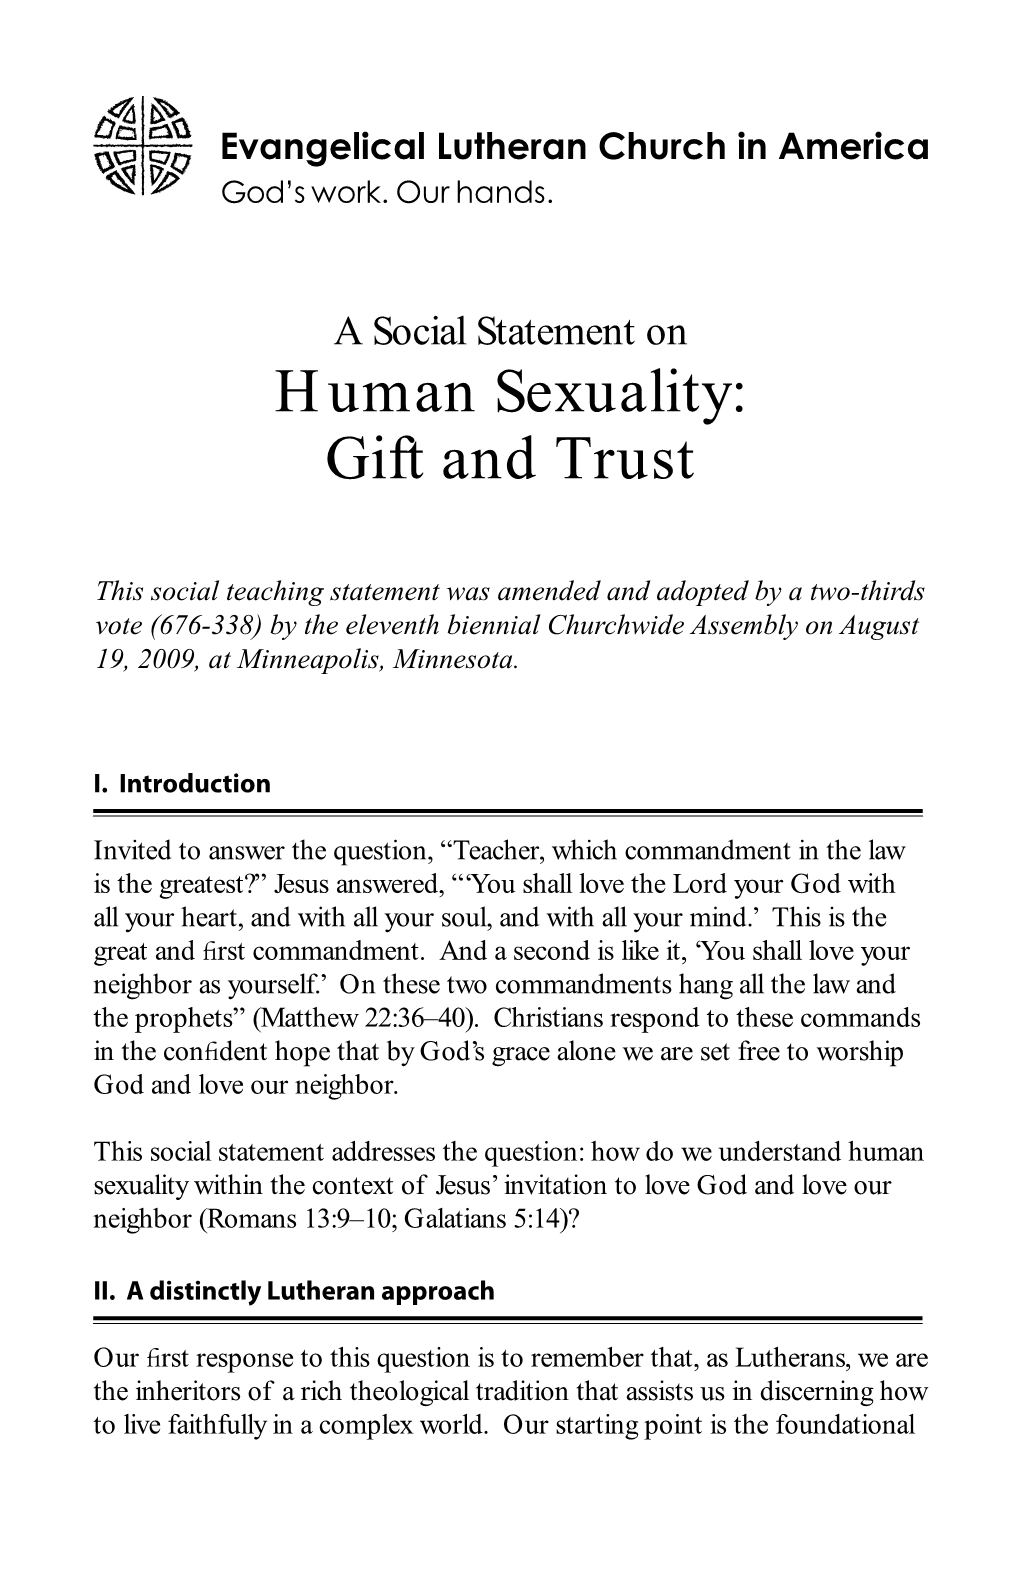 A Social Statement on Human Sexuality: Gift and Trust